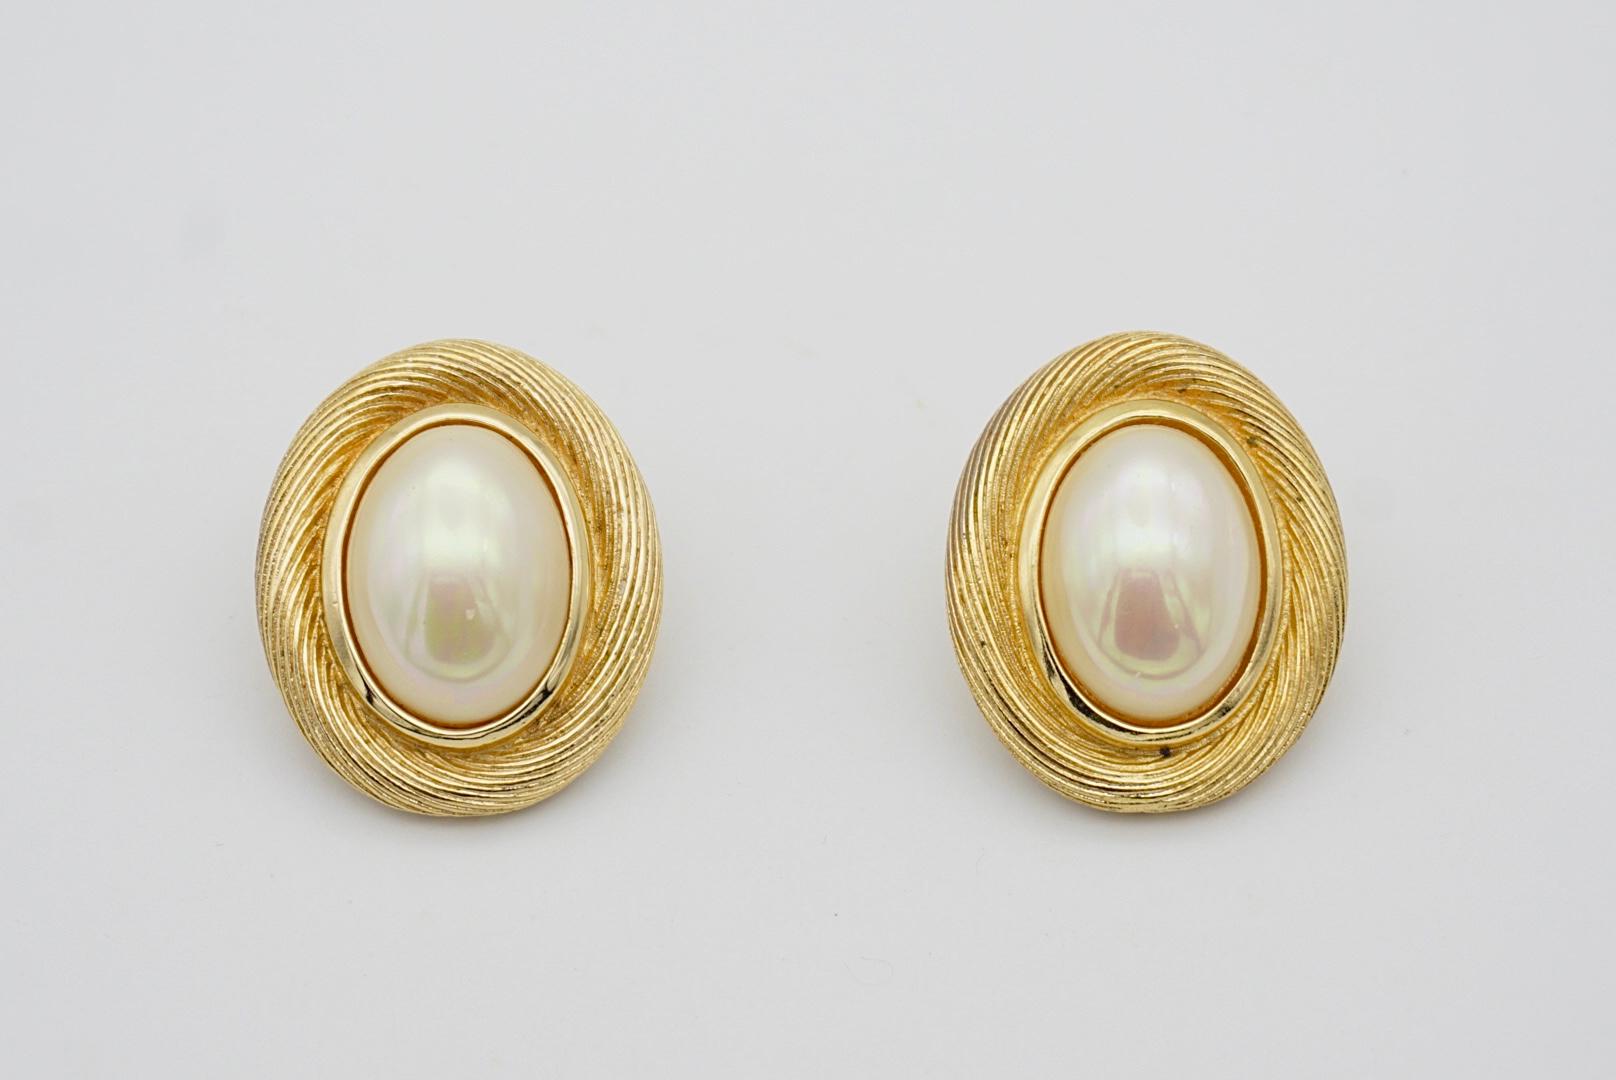 Christian Dior Vintage 1980s Large Oval White Pearl Retro Gold Pierced Earrings 1